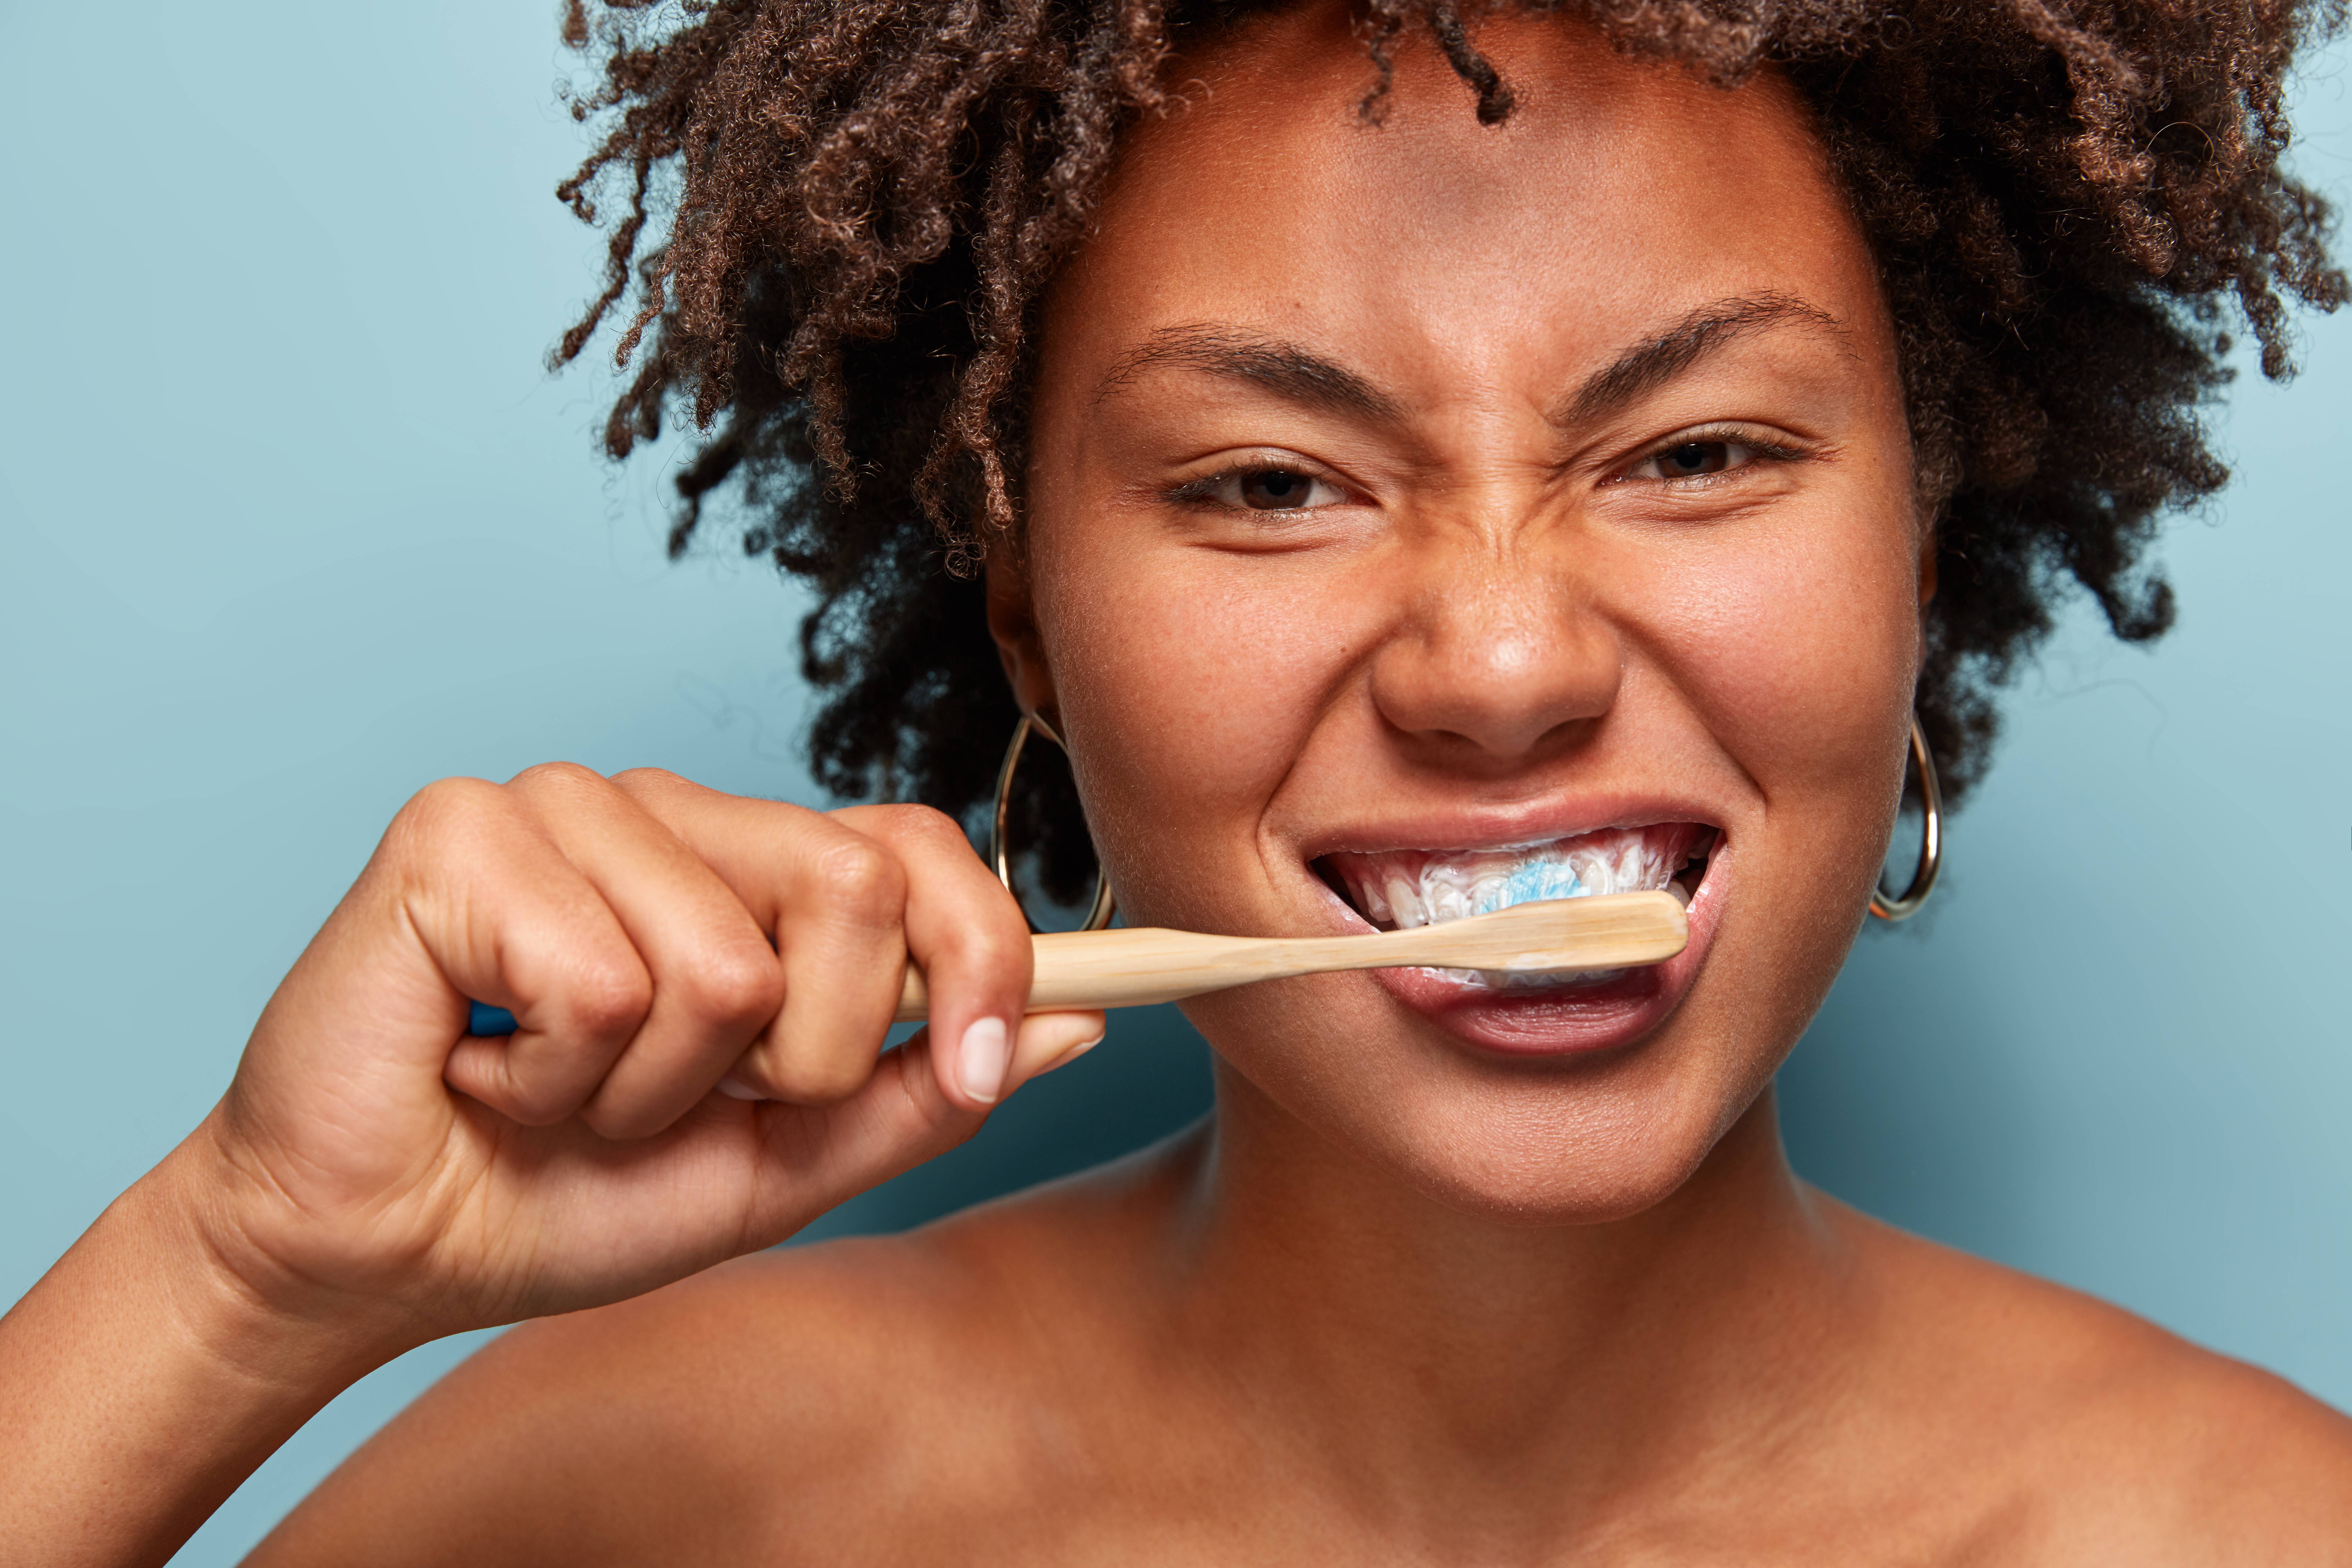 Dental hygiene concept. Self confident mixed race young woman brushes teeth with toothpaste and toothbrush, stands in front of mirror nude, isolated on blue background. Medicine, health care